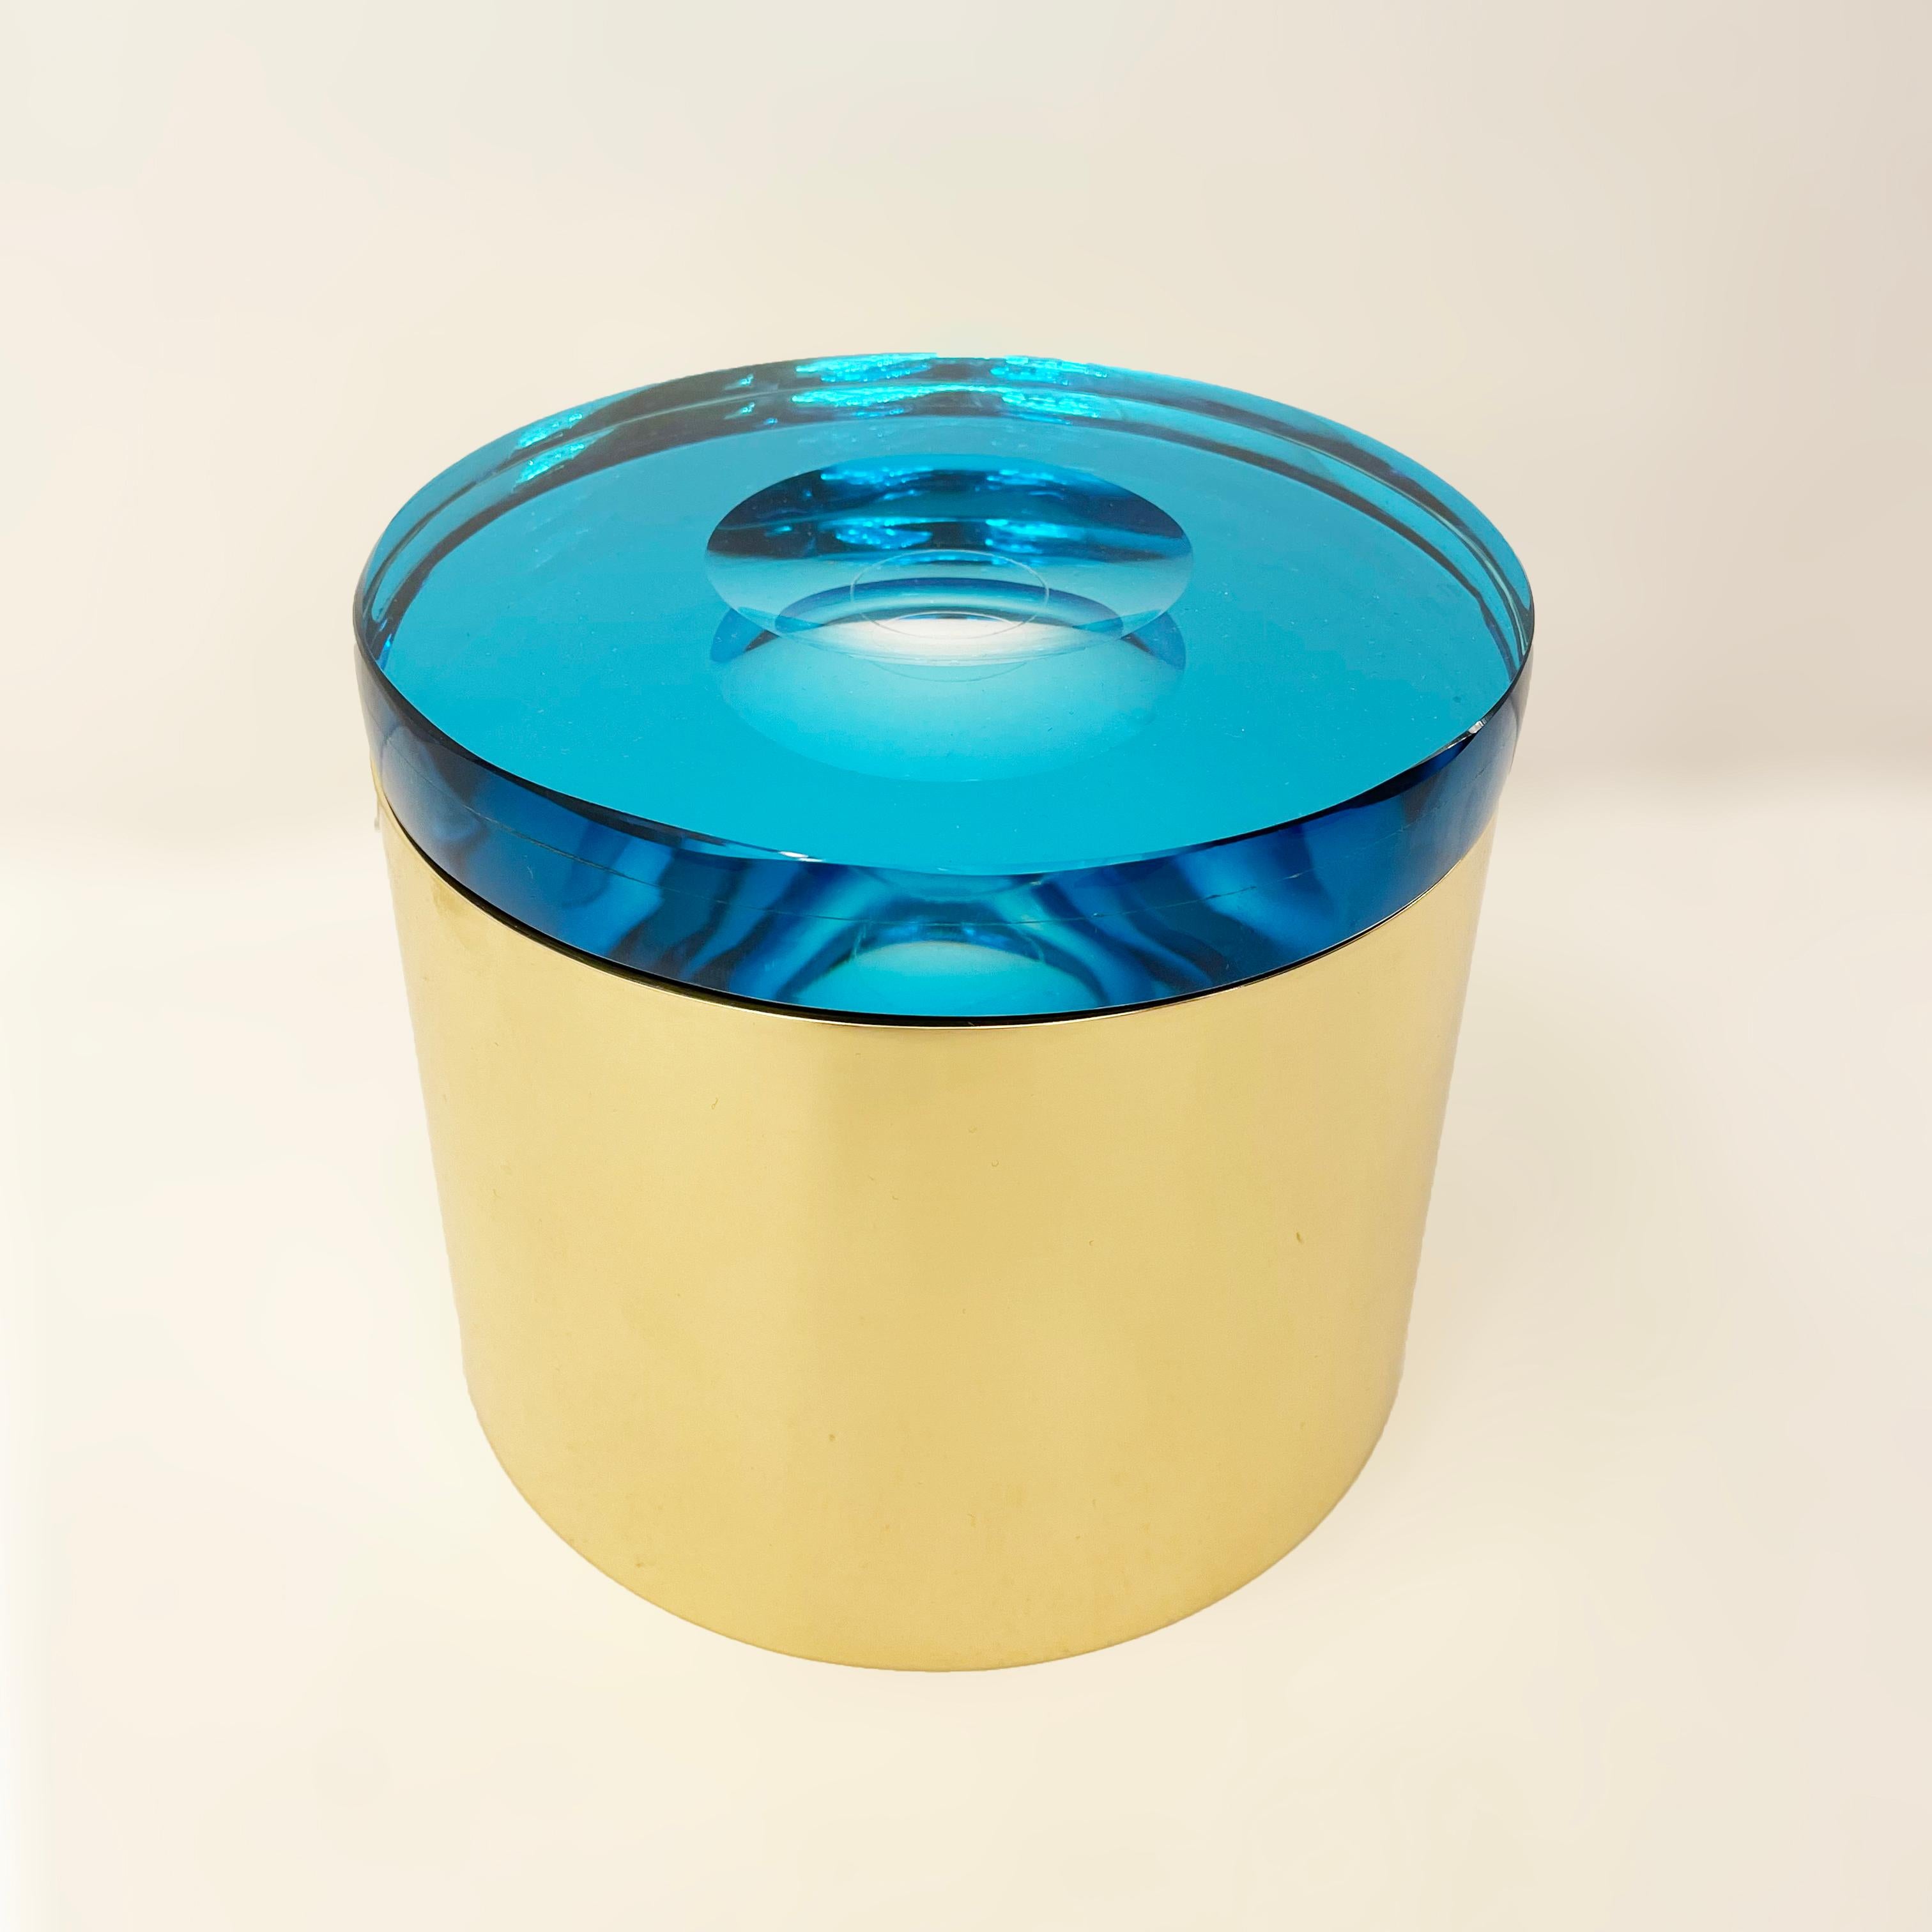 Brass Candela Glass Box by Form A, Blue Glass and Bronze Base